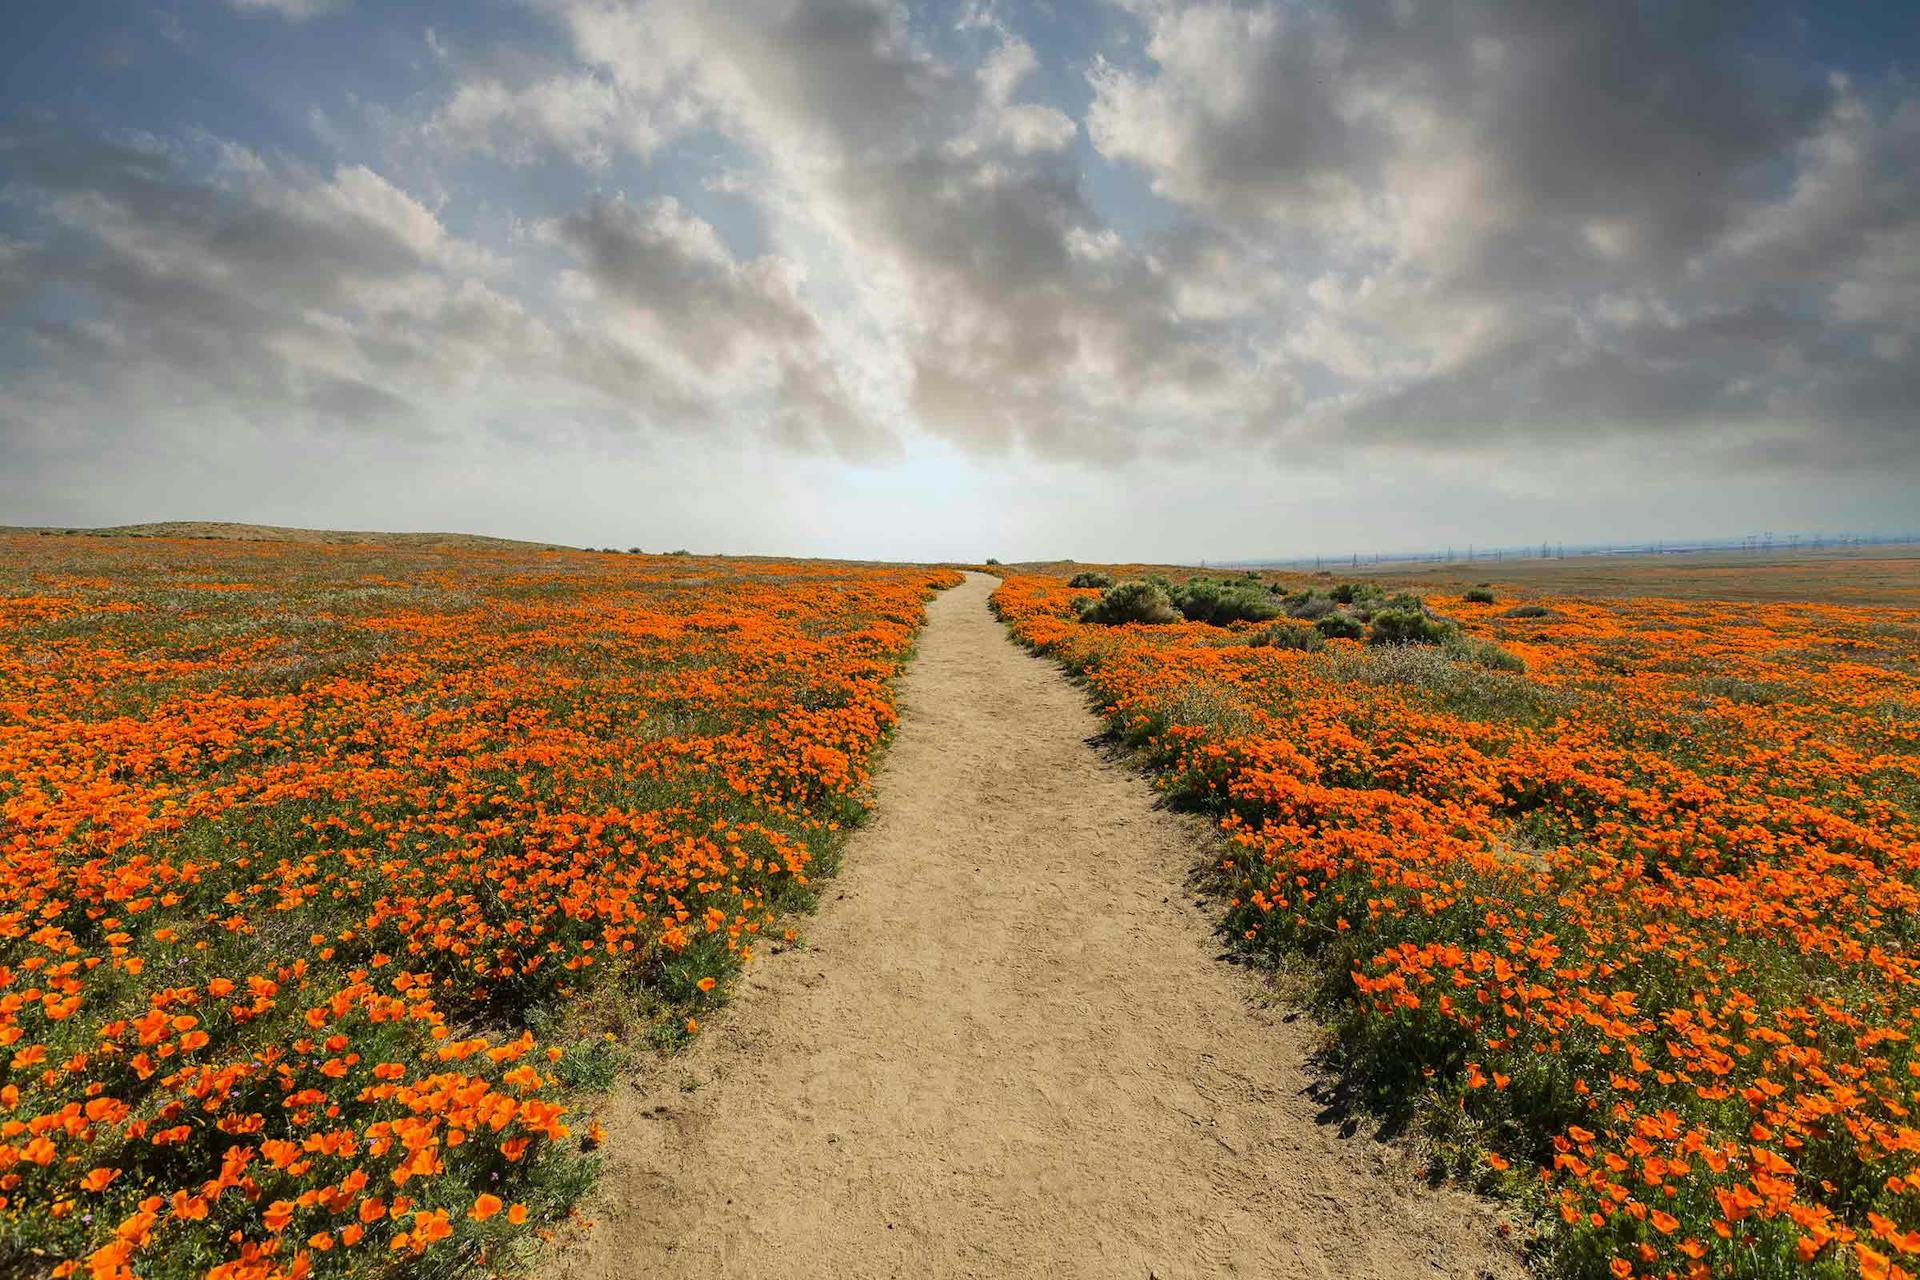 The Best Places to See Wildflowers and Where to Camp